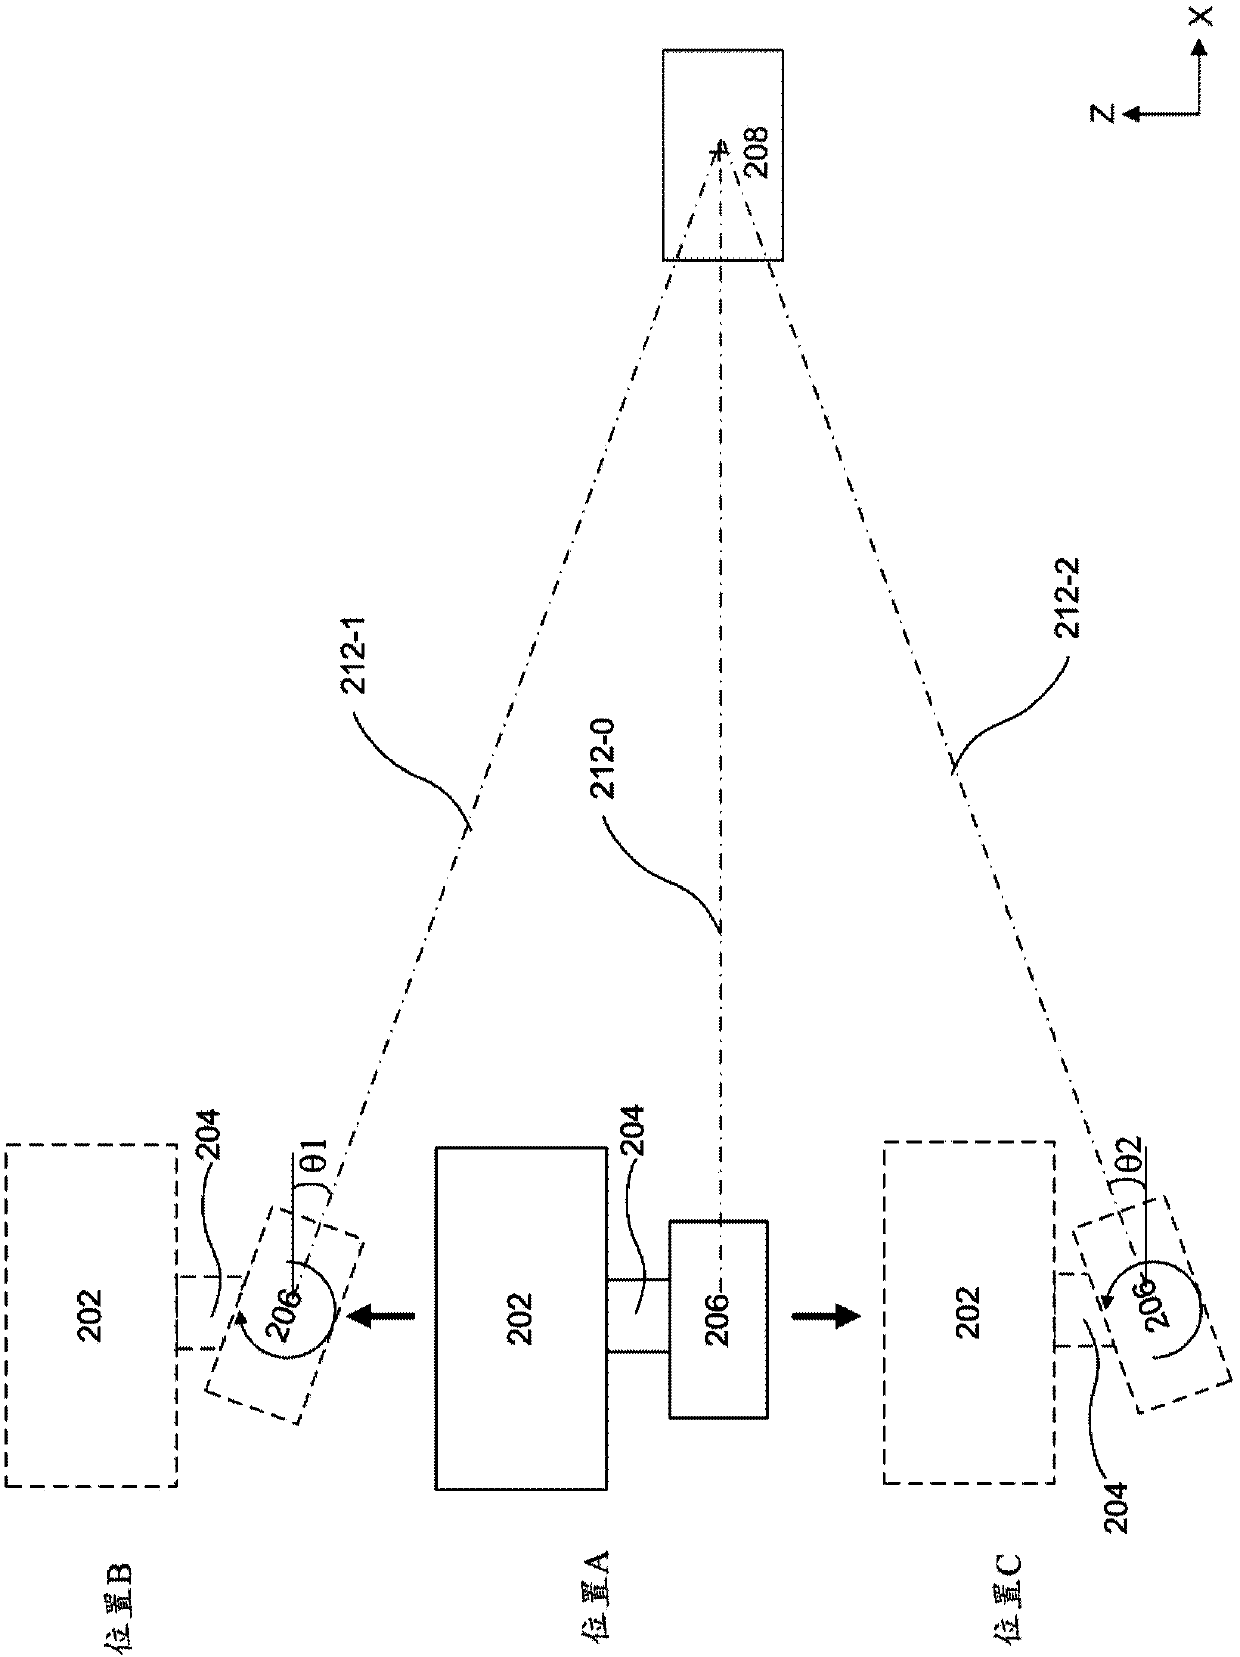 Systems and methods for visual target tracking